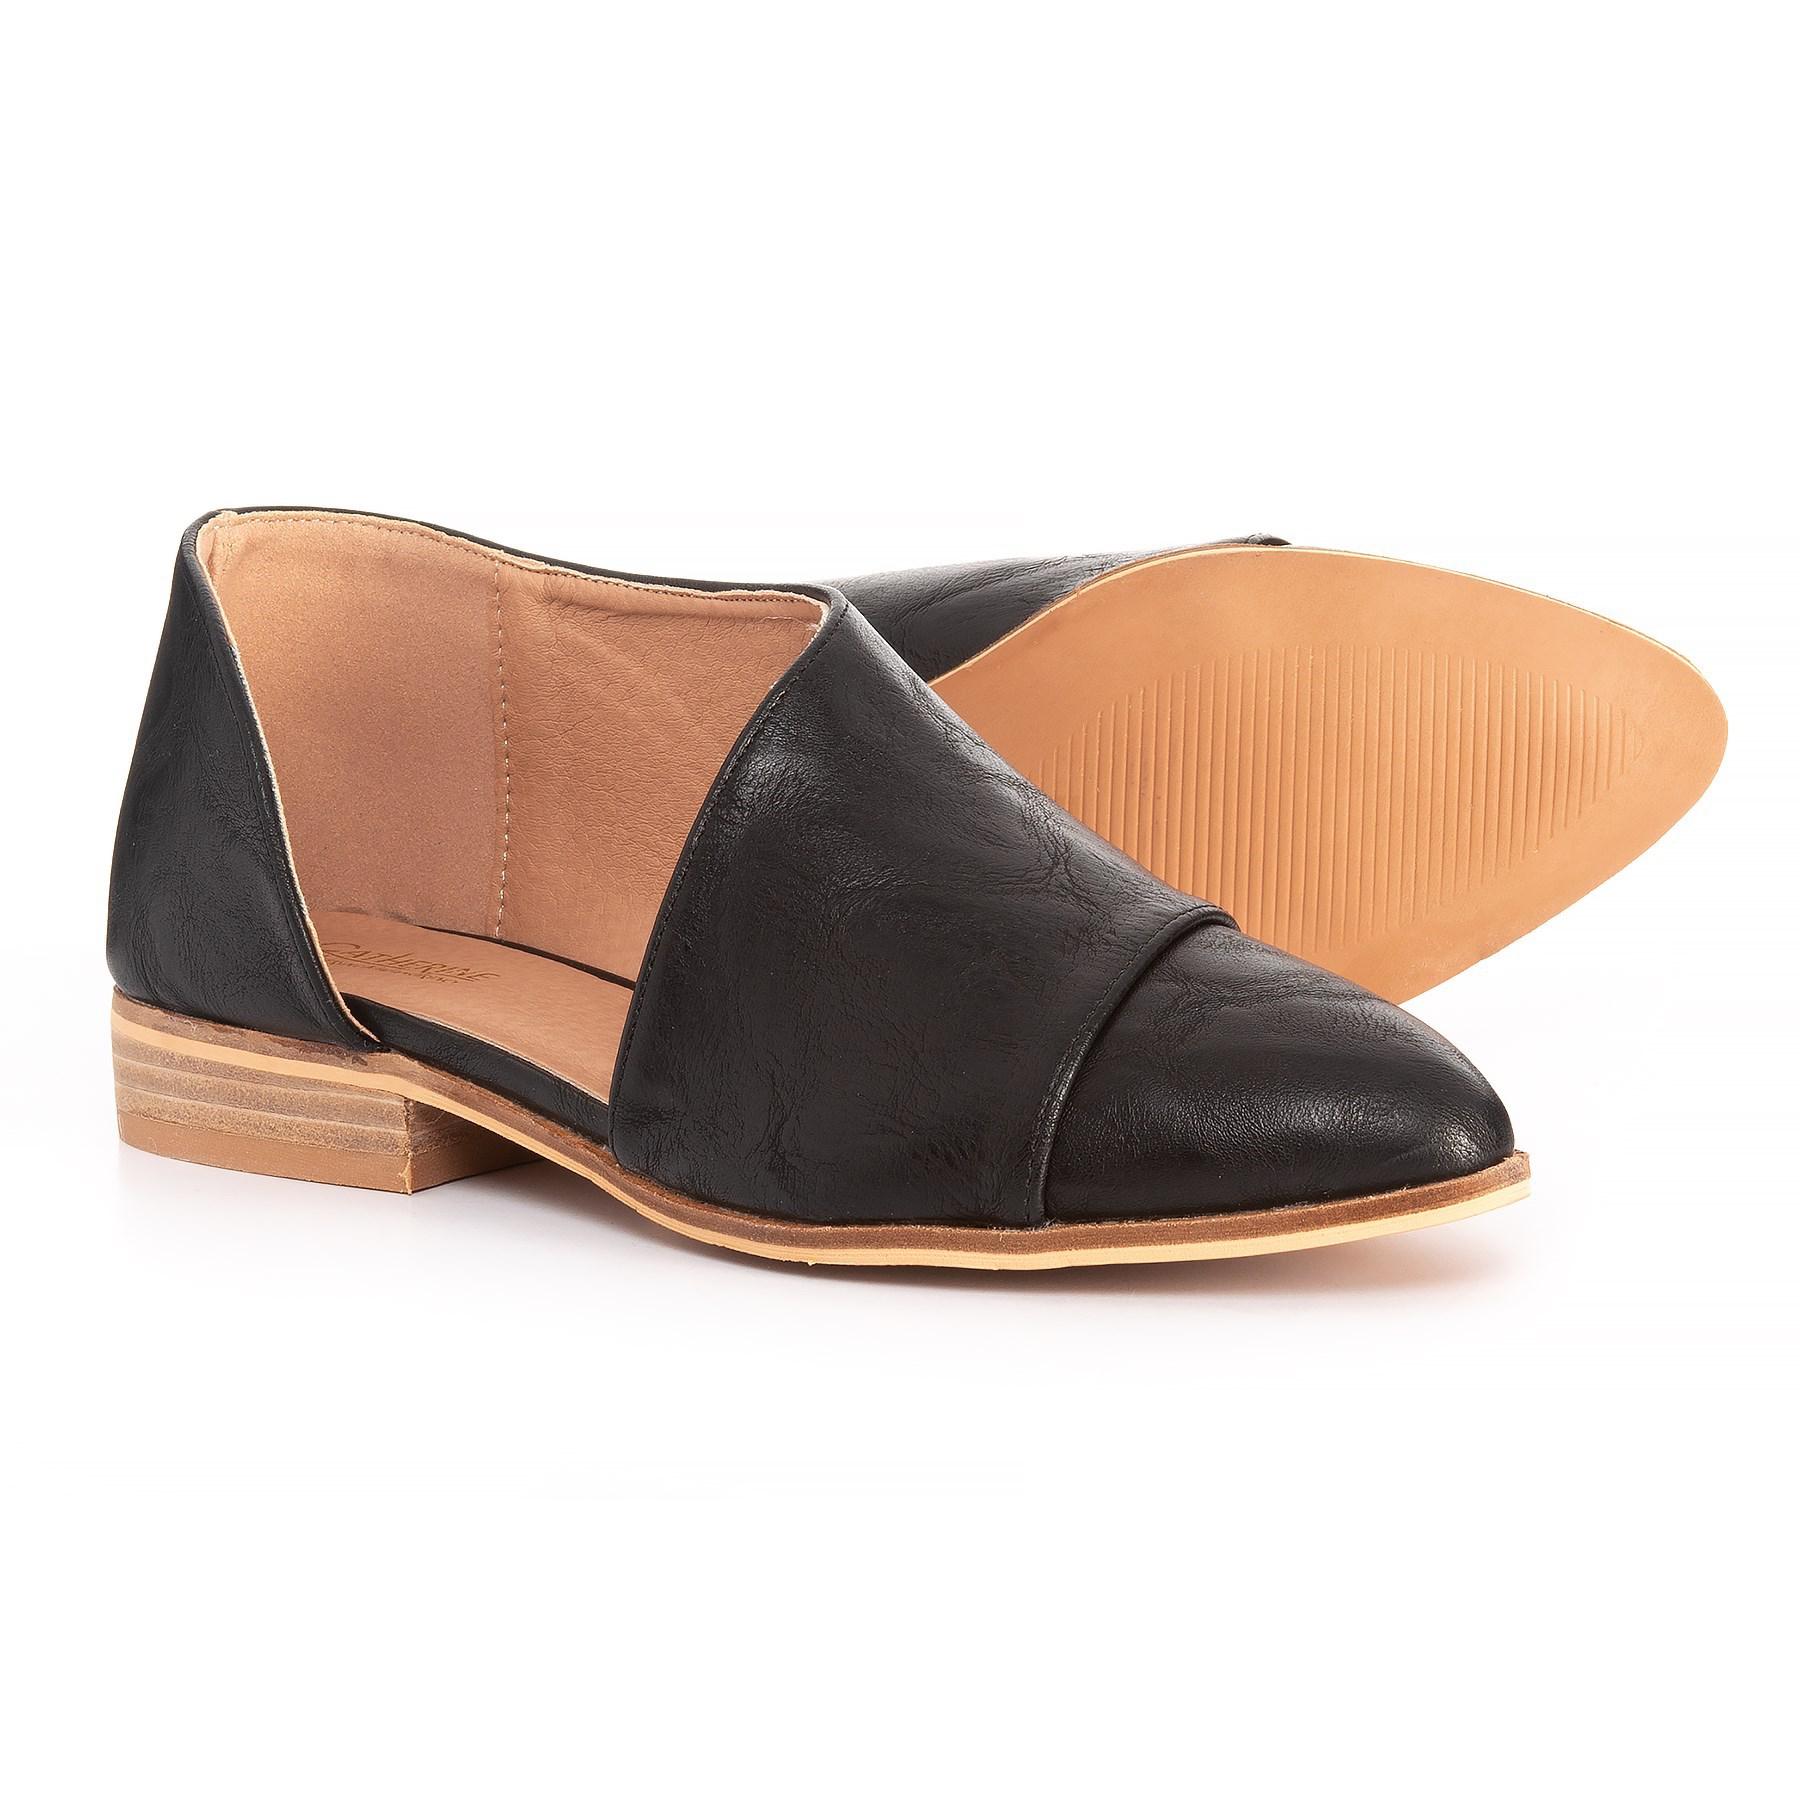 Catherine Malandrino Asymmetrical Opensided Shoes in